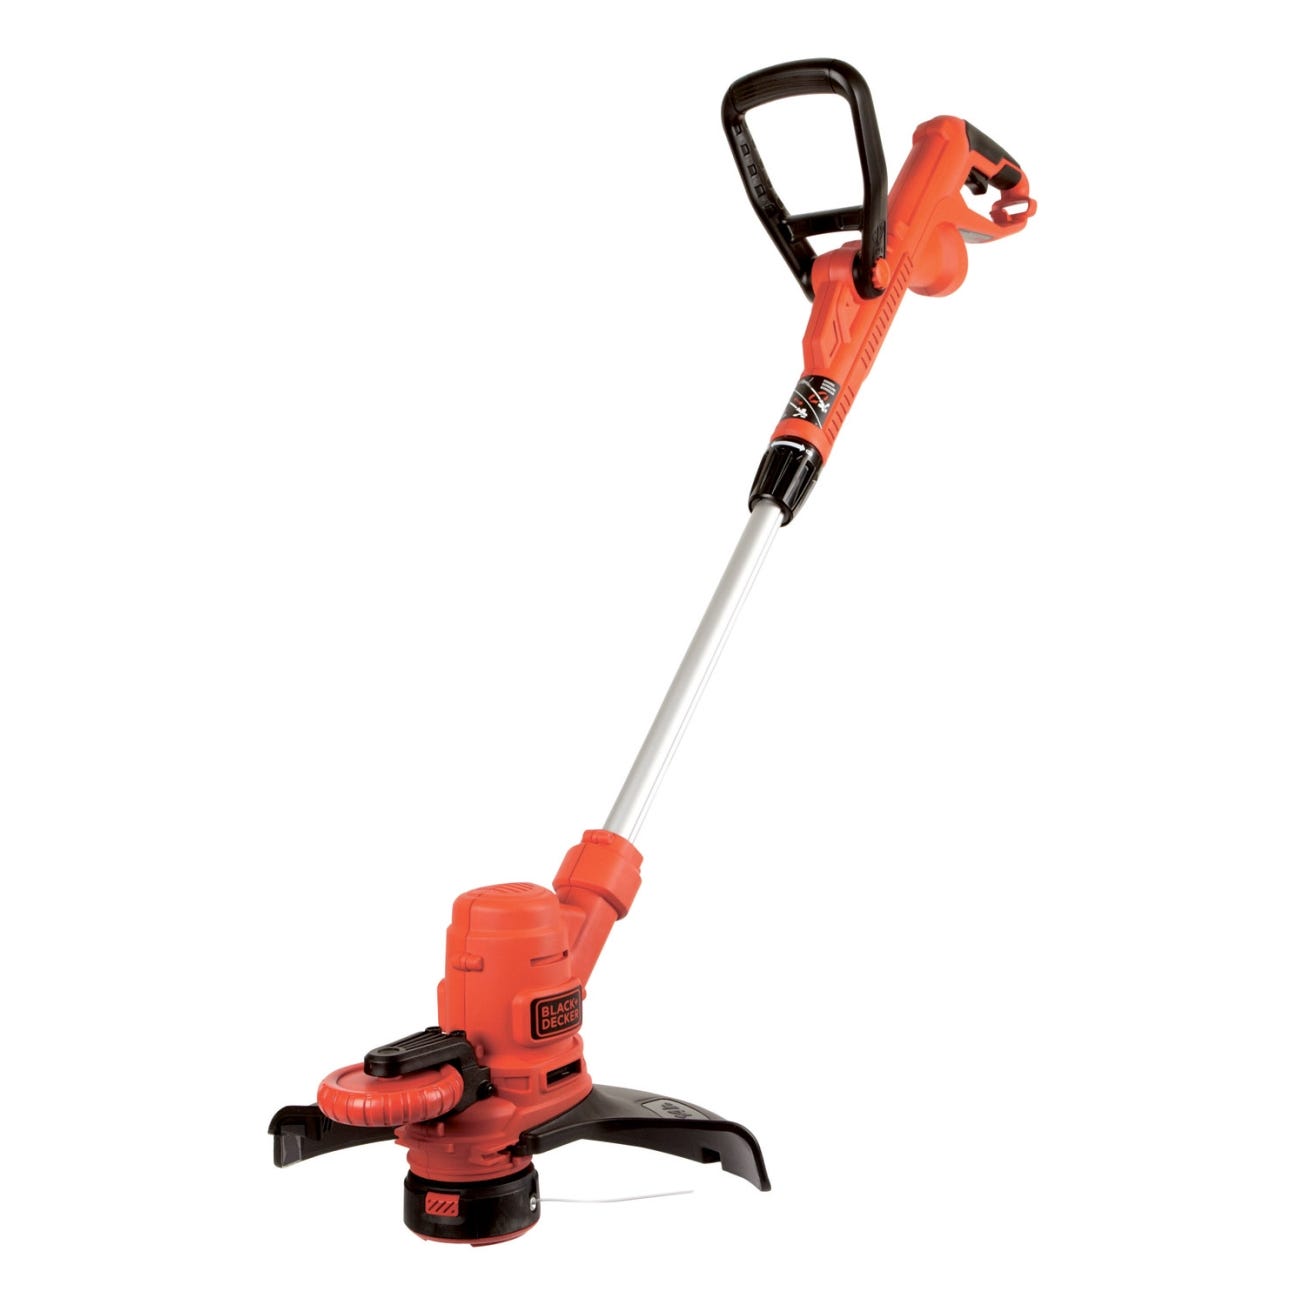 Black & Decker 12 in. 6.5A Electric 3-in-1 Compact Lawn Mower at